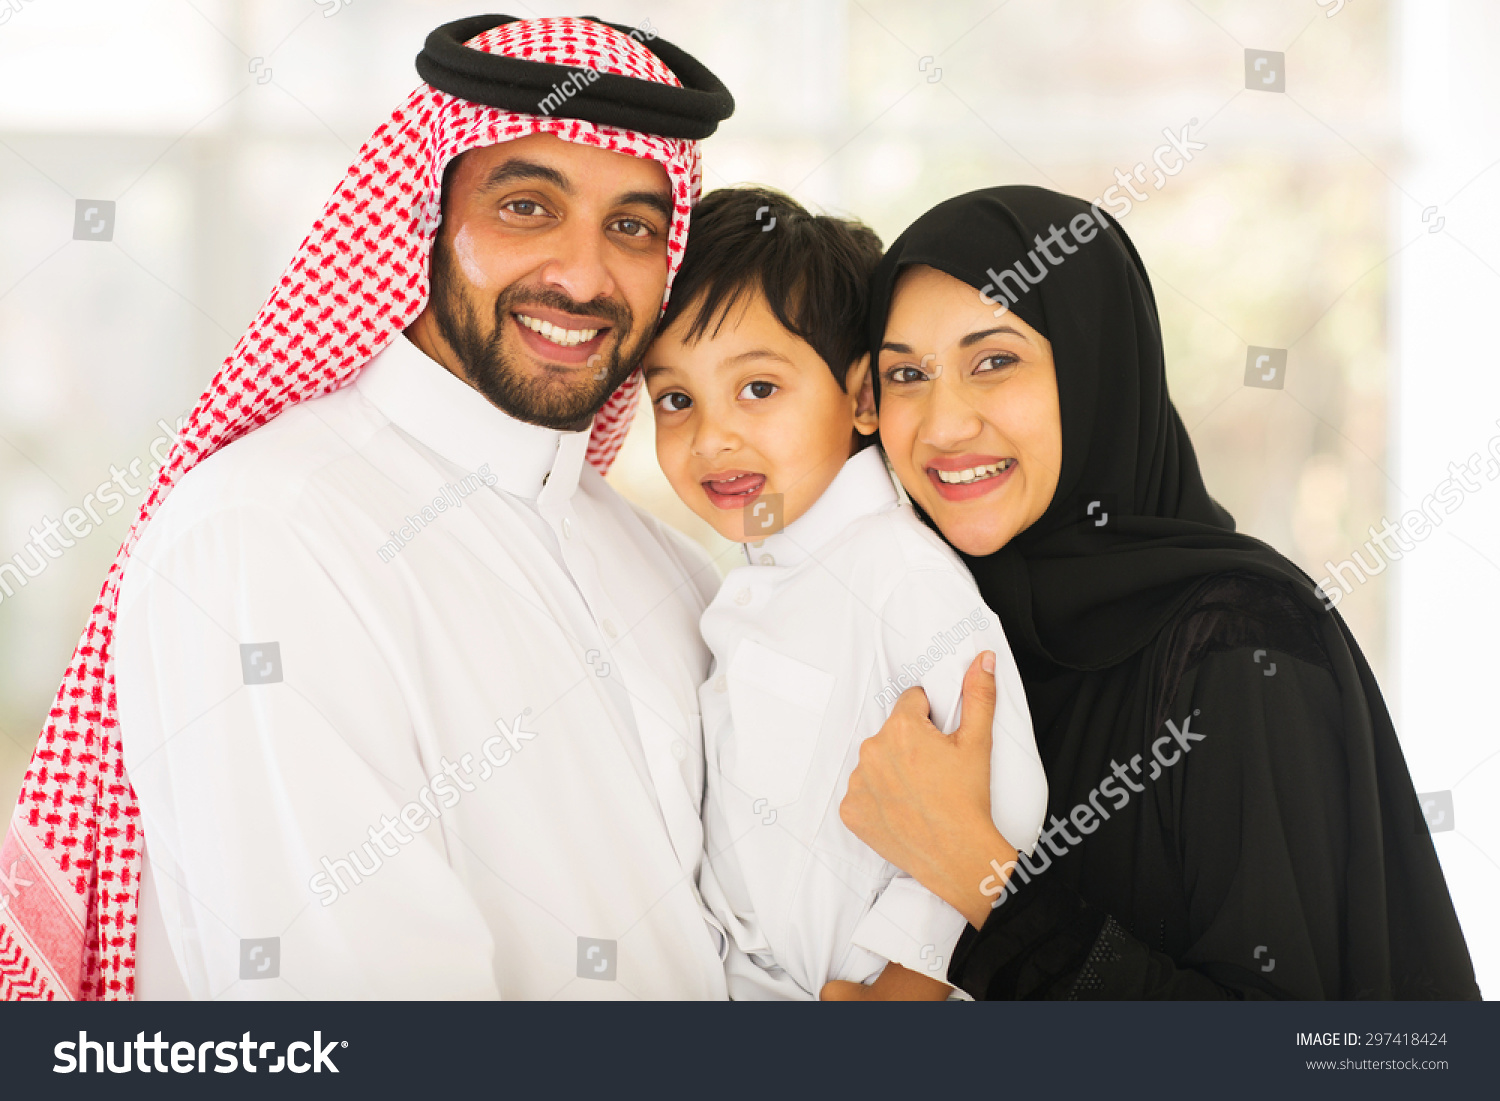 portrait of happy middle eastern family #297418424